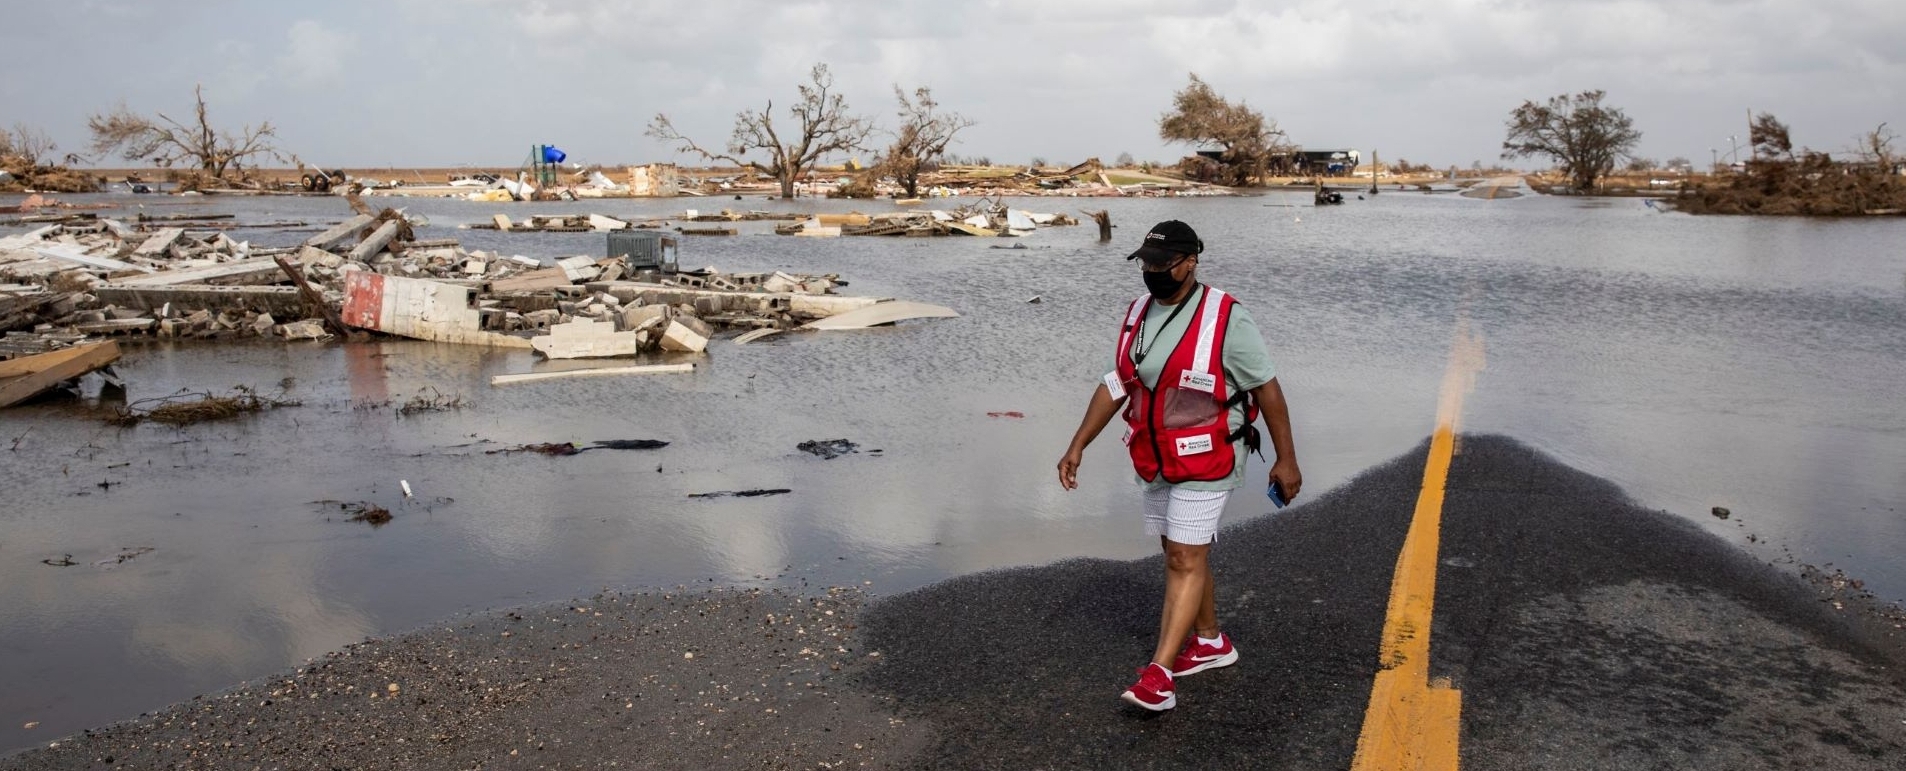 red cross volunteer surveying hurricane damage and flooded street